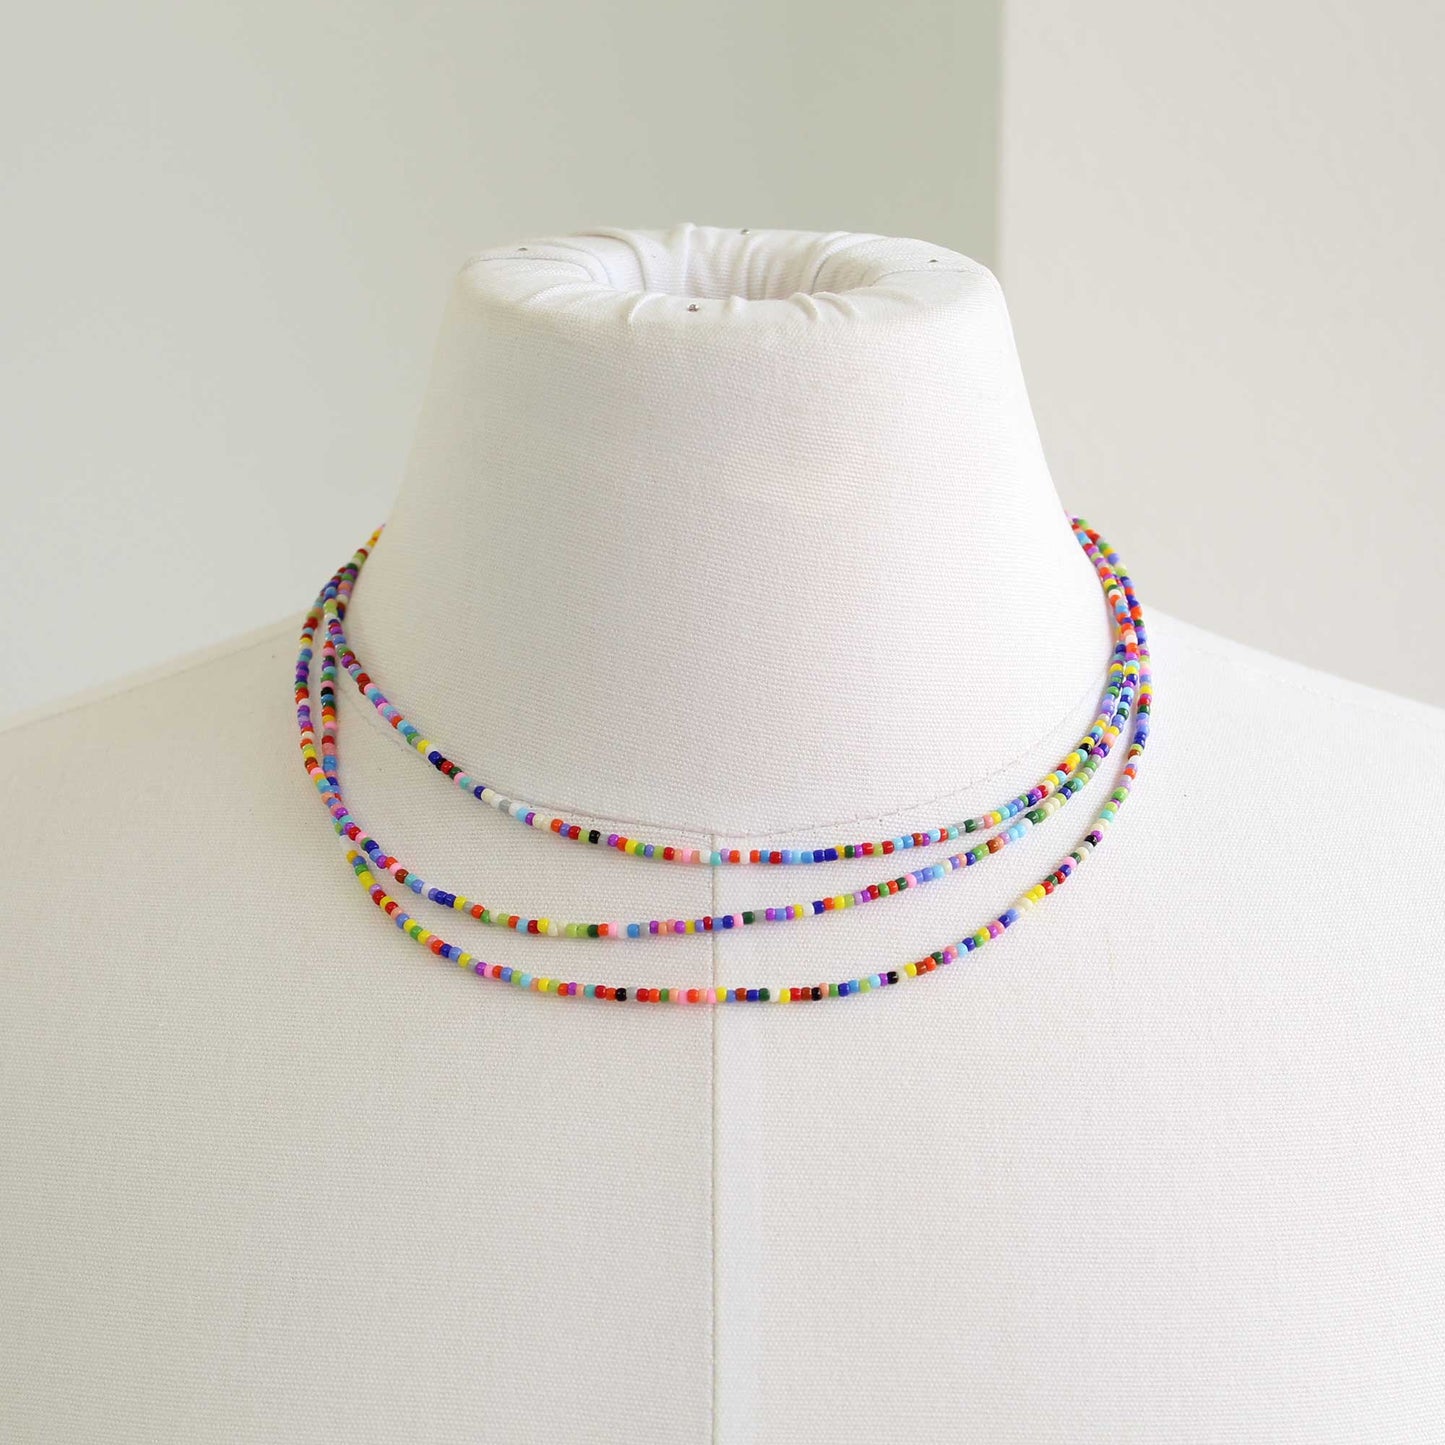 Colorful Gemstone Necklaces, Seed Light Weight Beaded Necklace, Tiny Bead  Choker | eBay